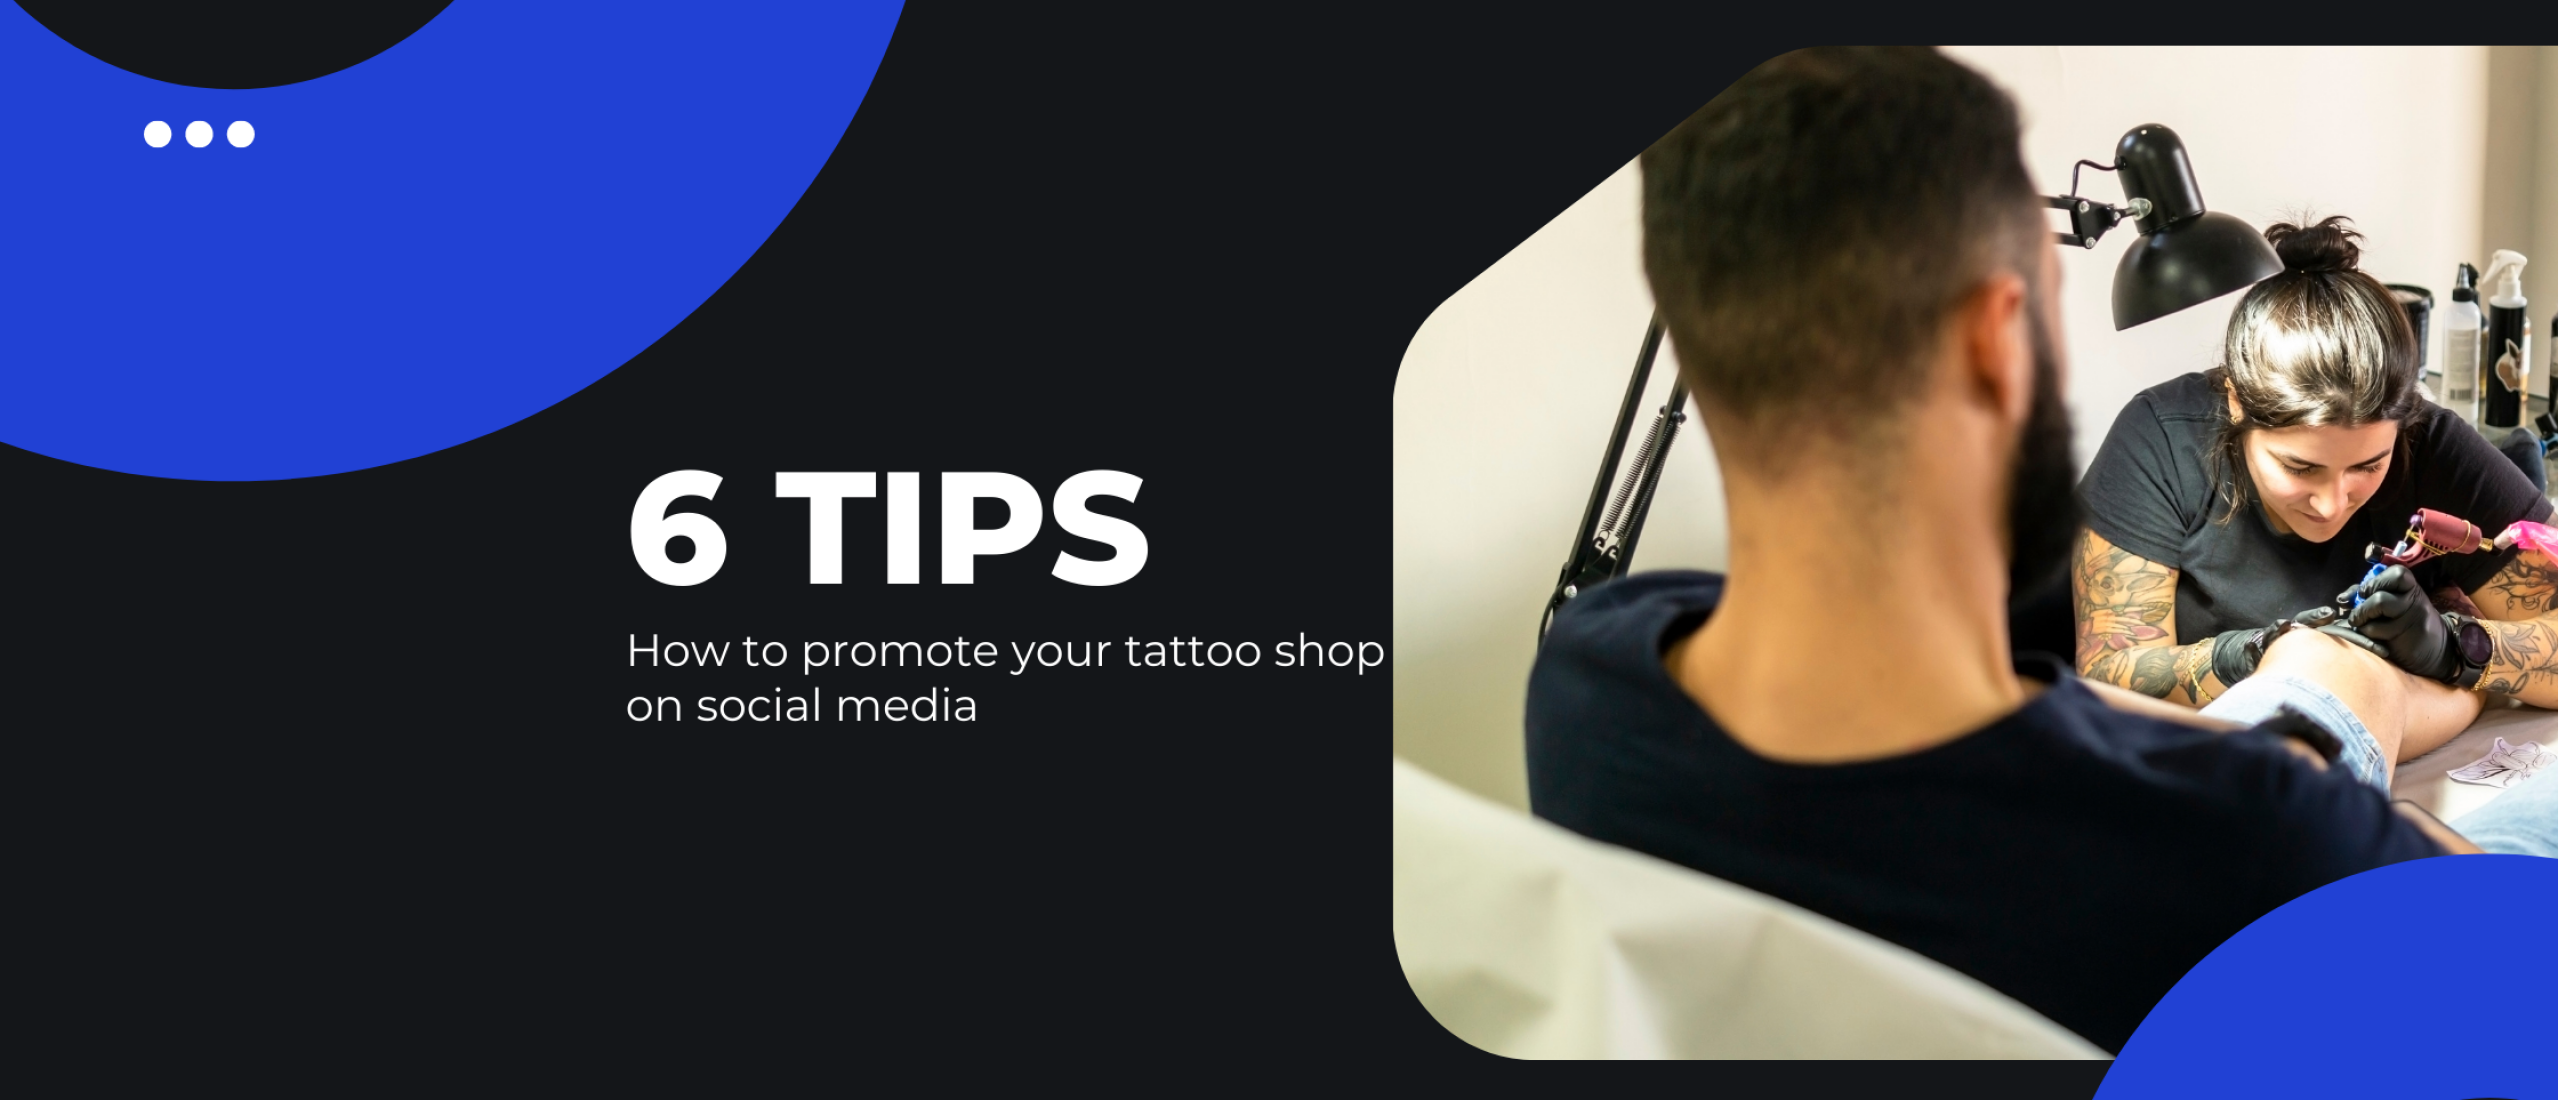 6-tips-how-to-promote-your-tattoo-shop-on-social-media